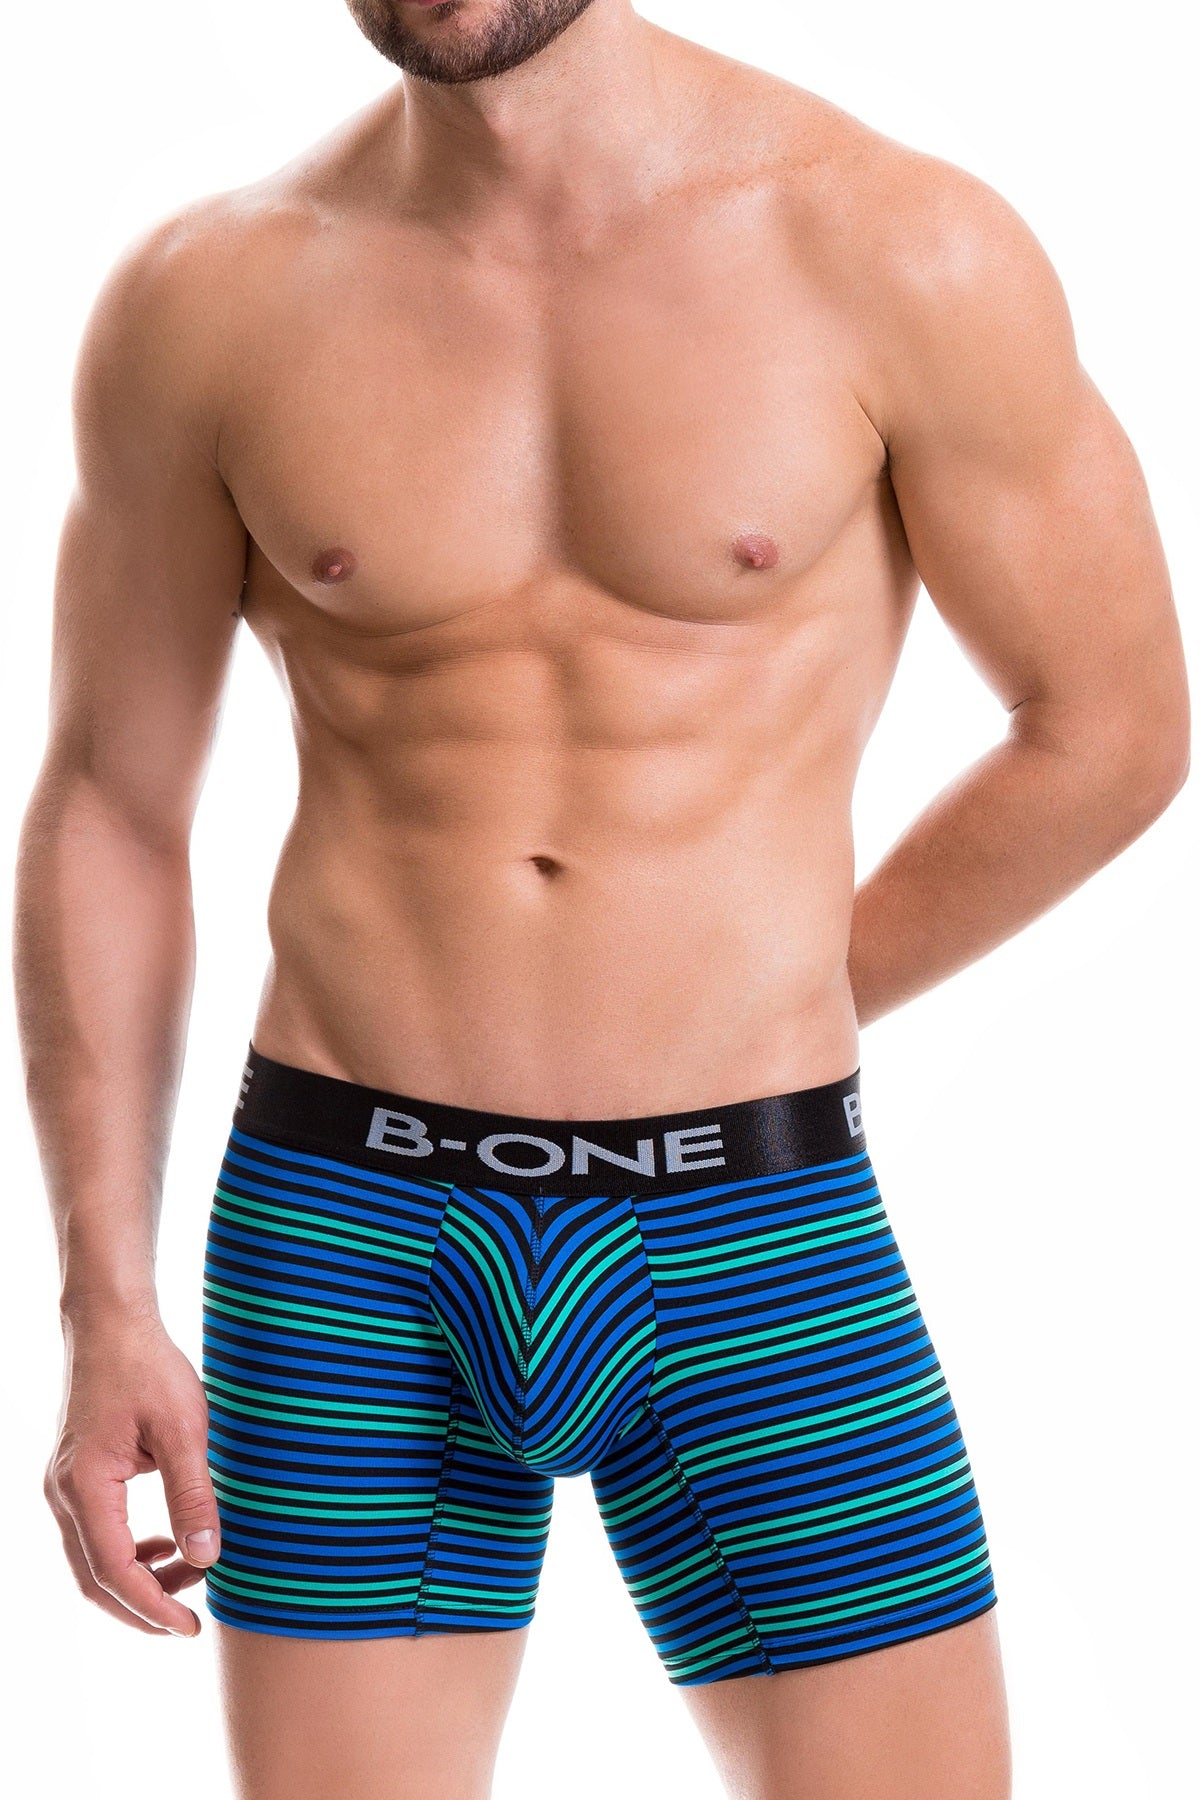 B-One by JOR Blue Lincoln Boxer Brief